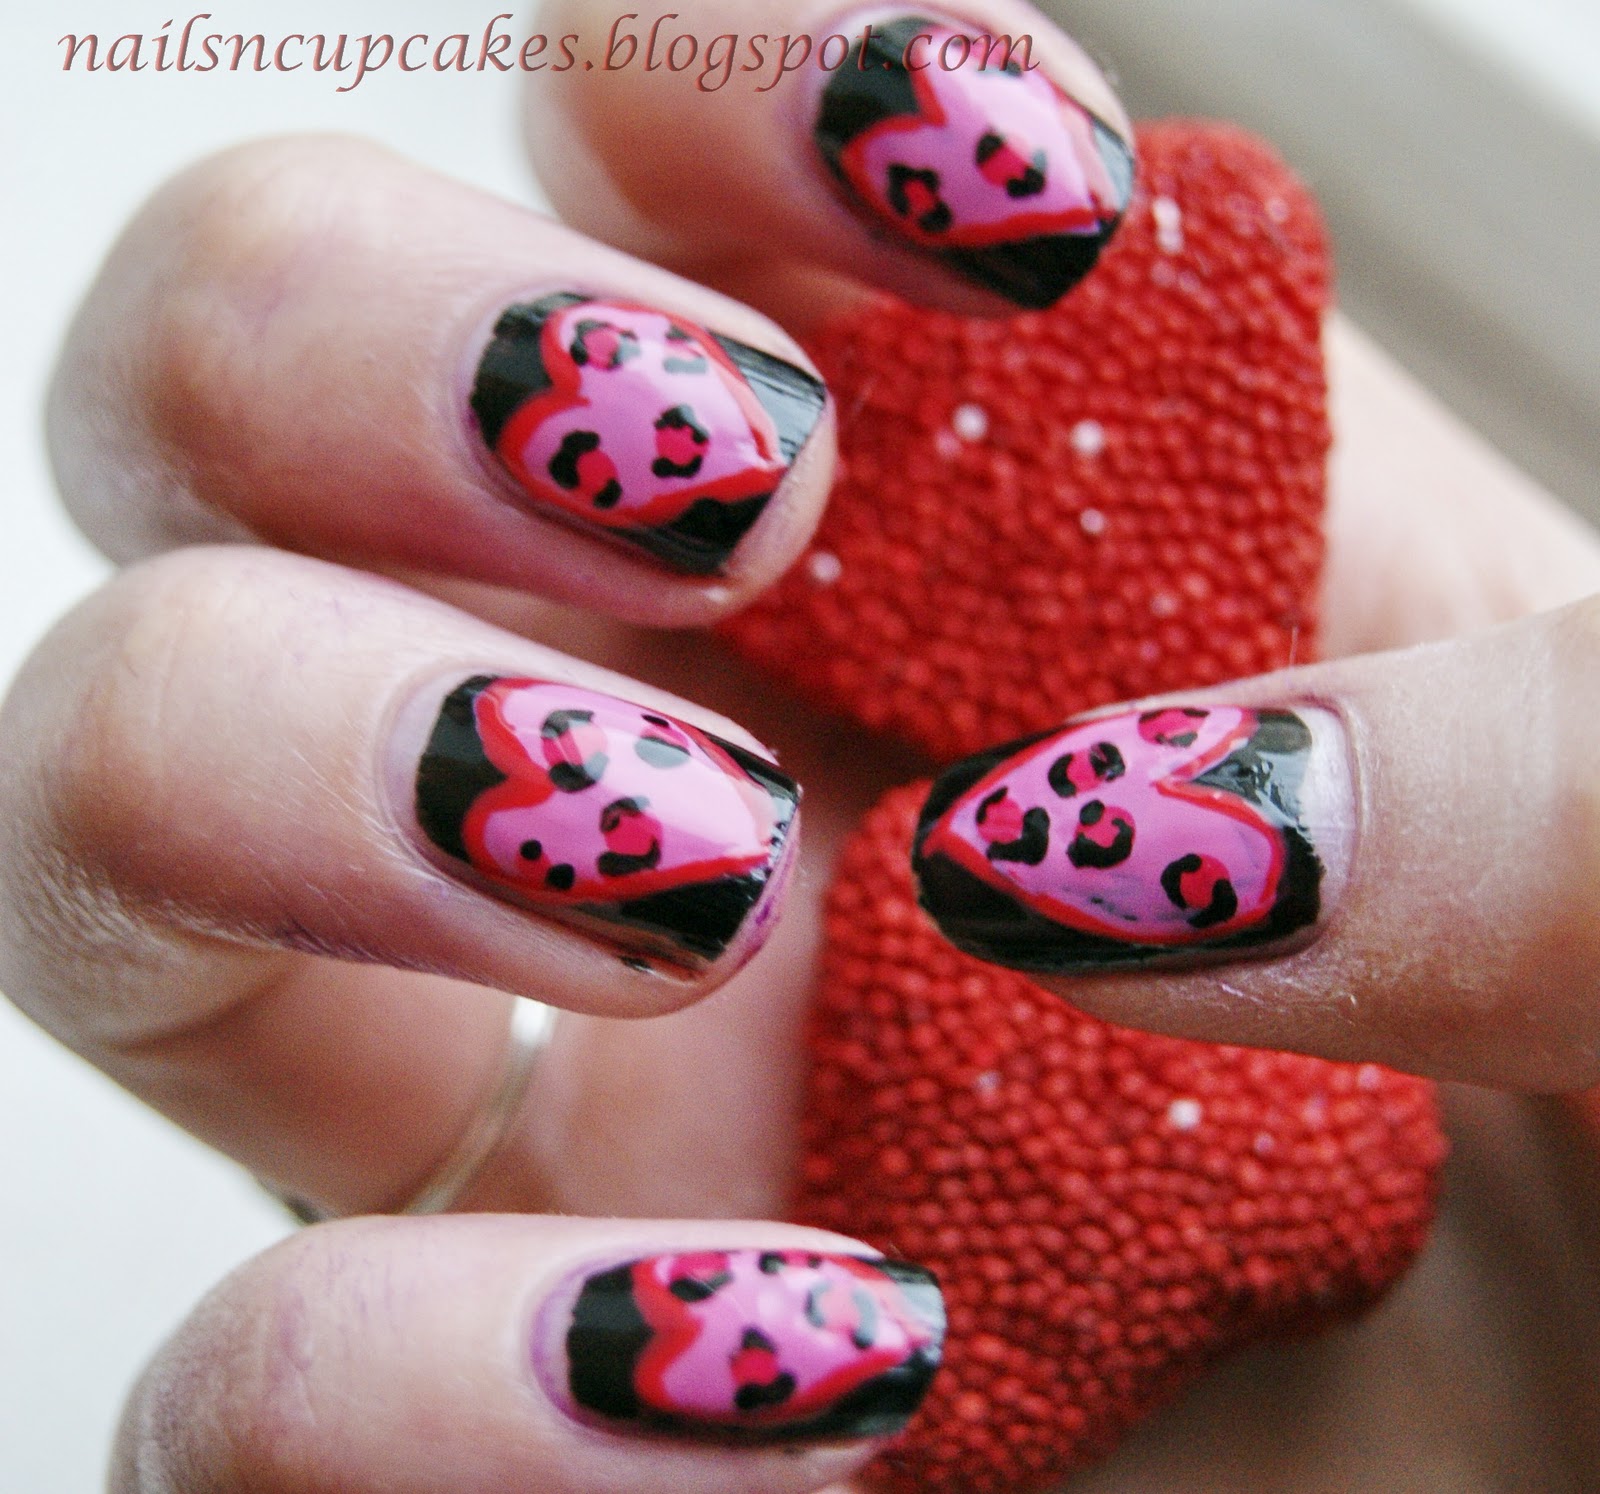 NailsN'cupcakes: Guestpost for Jenna Froggy - Leopard Hearts